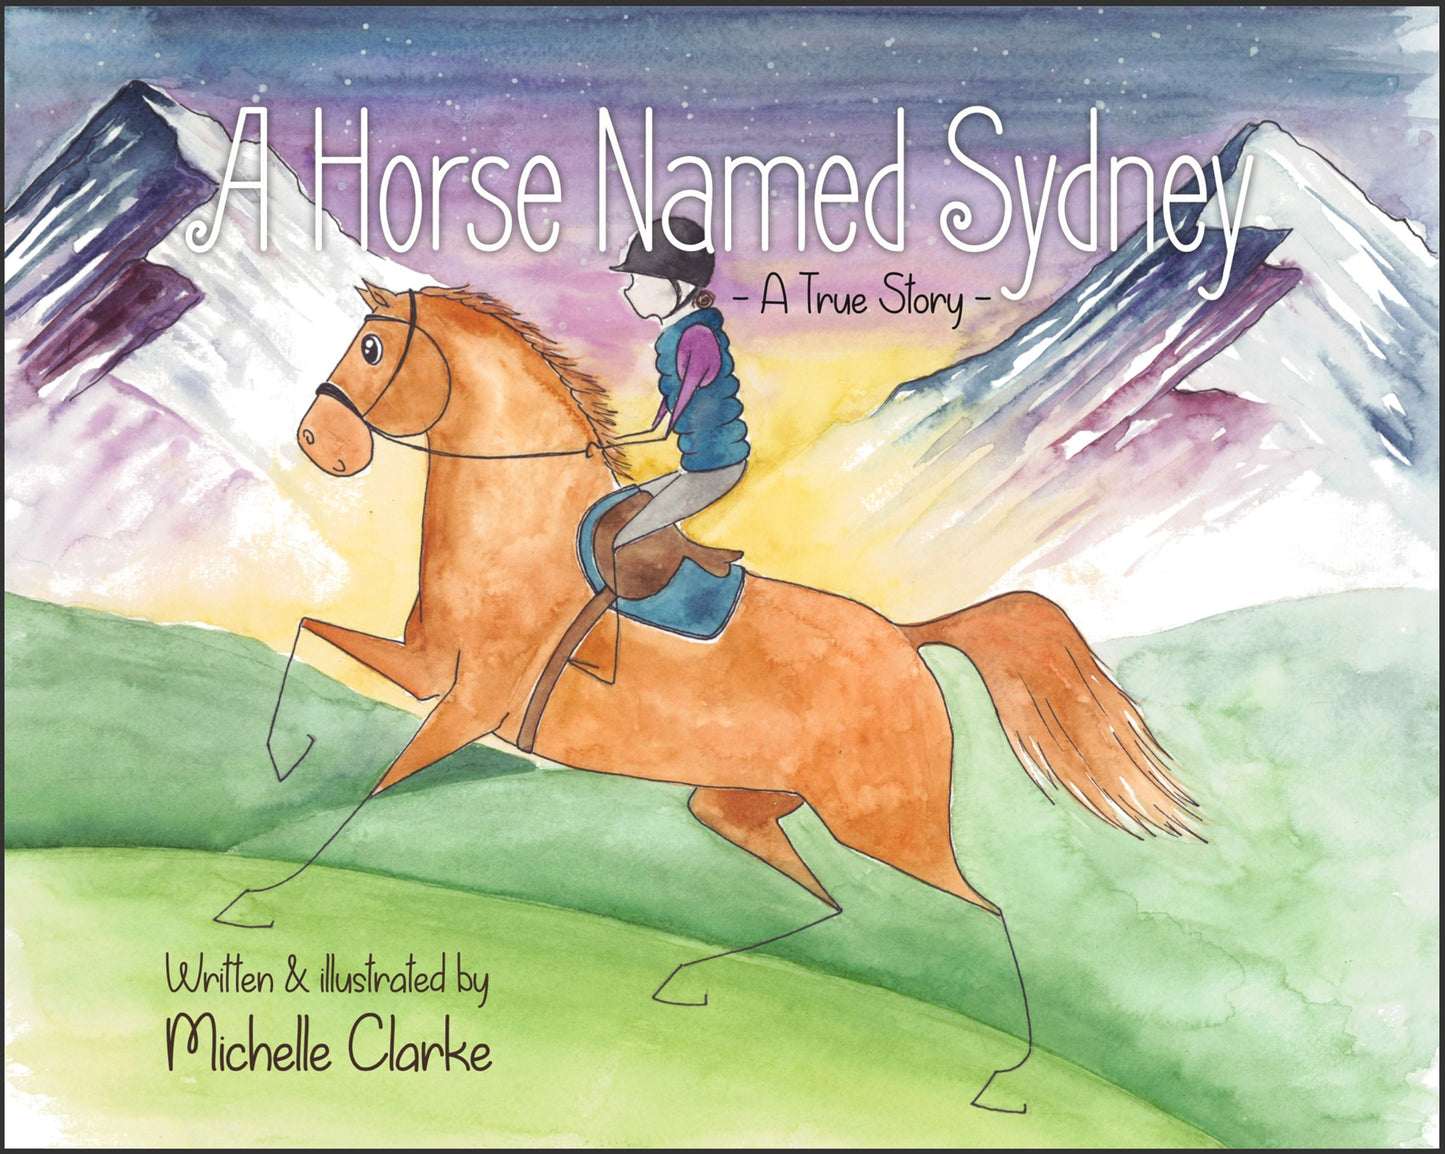 A Horse Named Sydney written & illustrated by Michelle Clarke